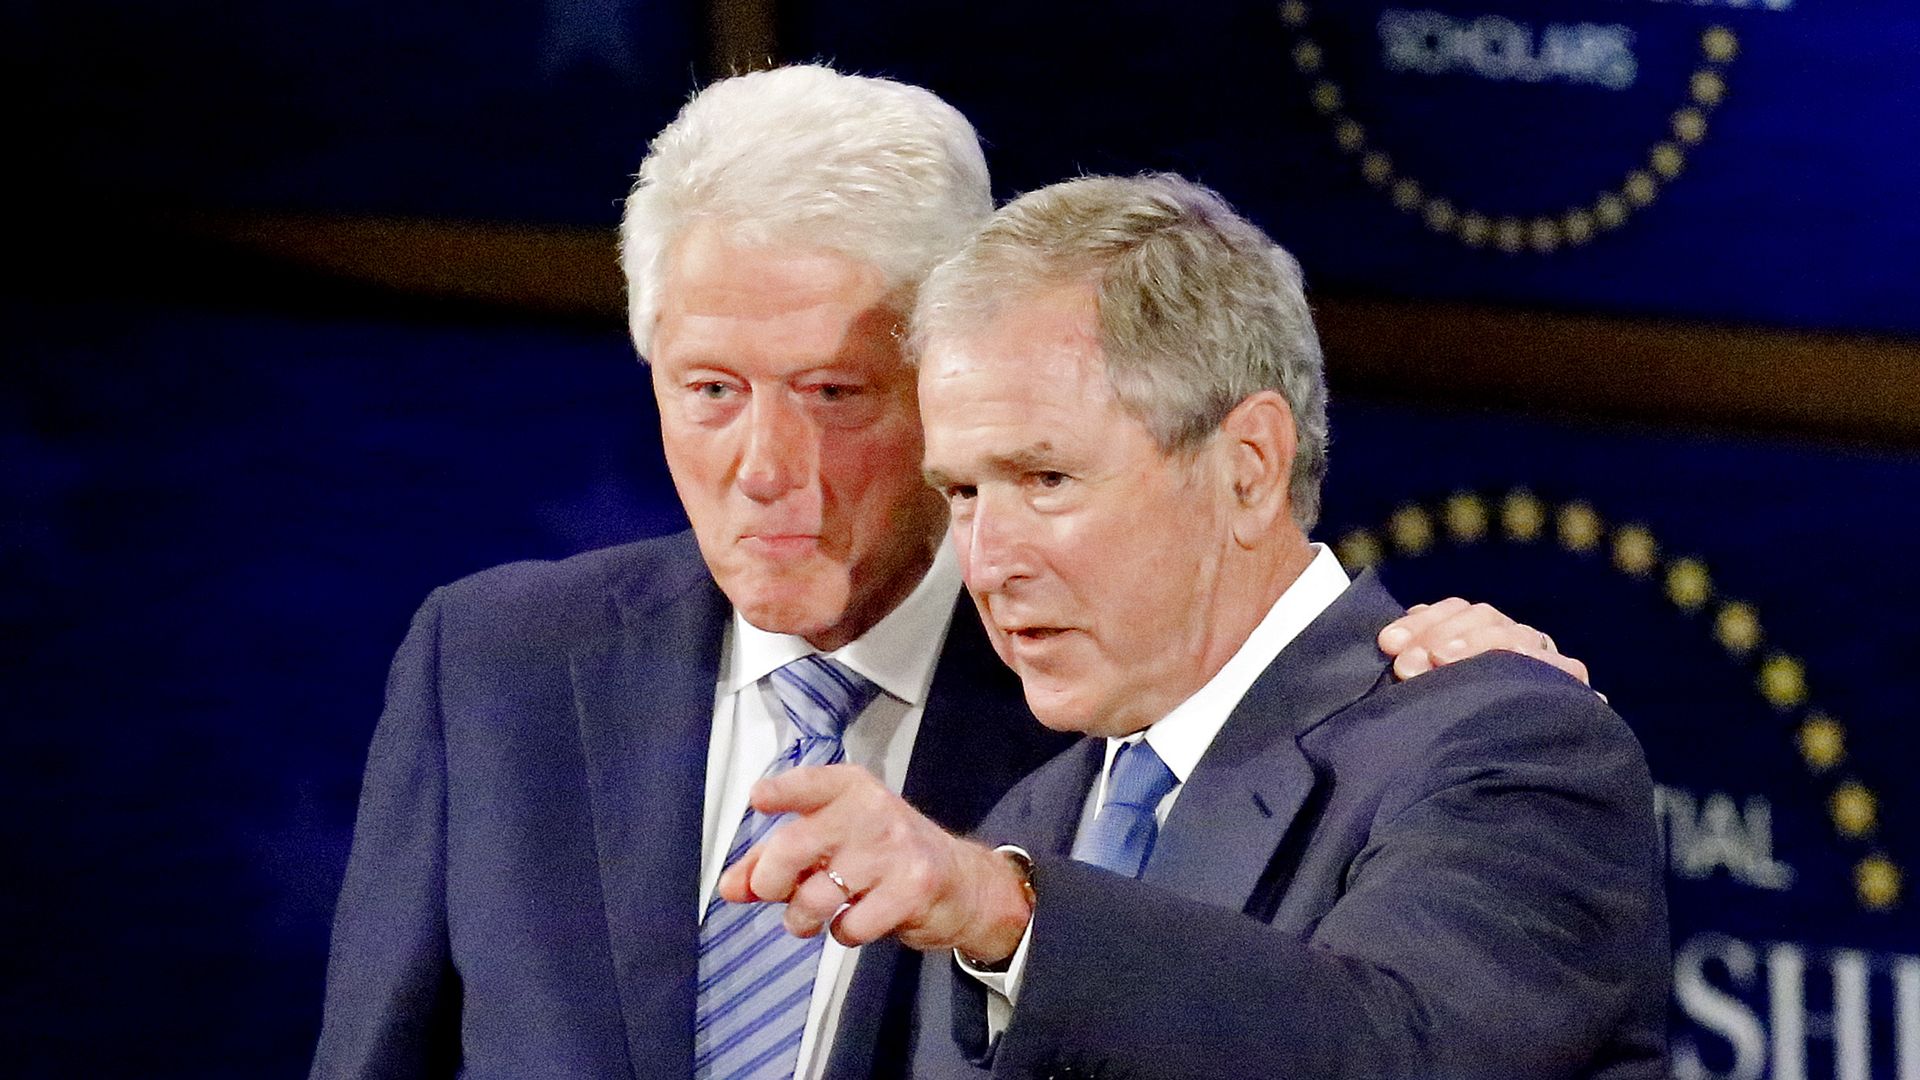 ormer U.S. President George W. Bush (2nd L) shakes hands with former President Bill Clinton 